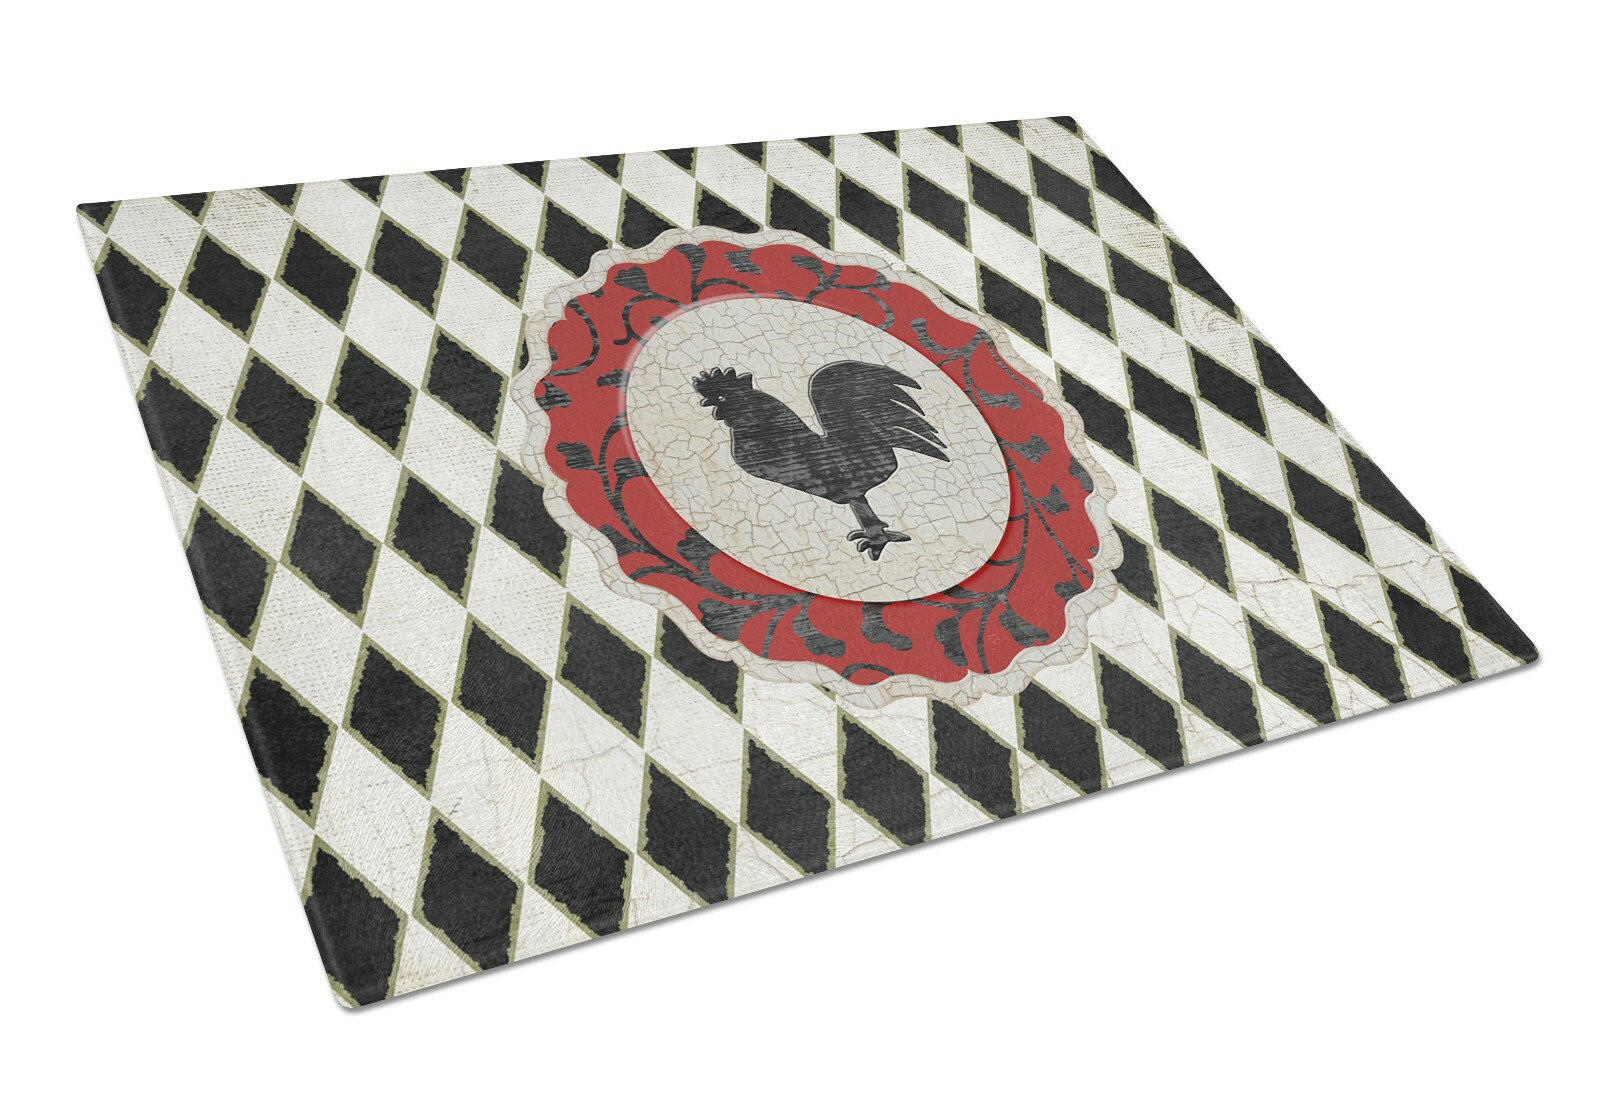 Rooster Harlequin Black and white Glass Cutting Board Large Size SB3086LCB by Caroline's Treasures